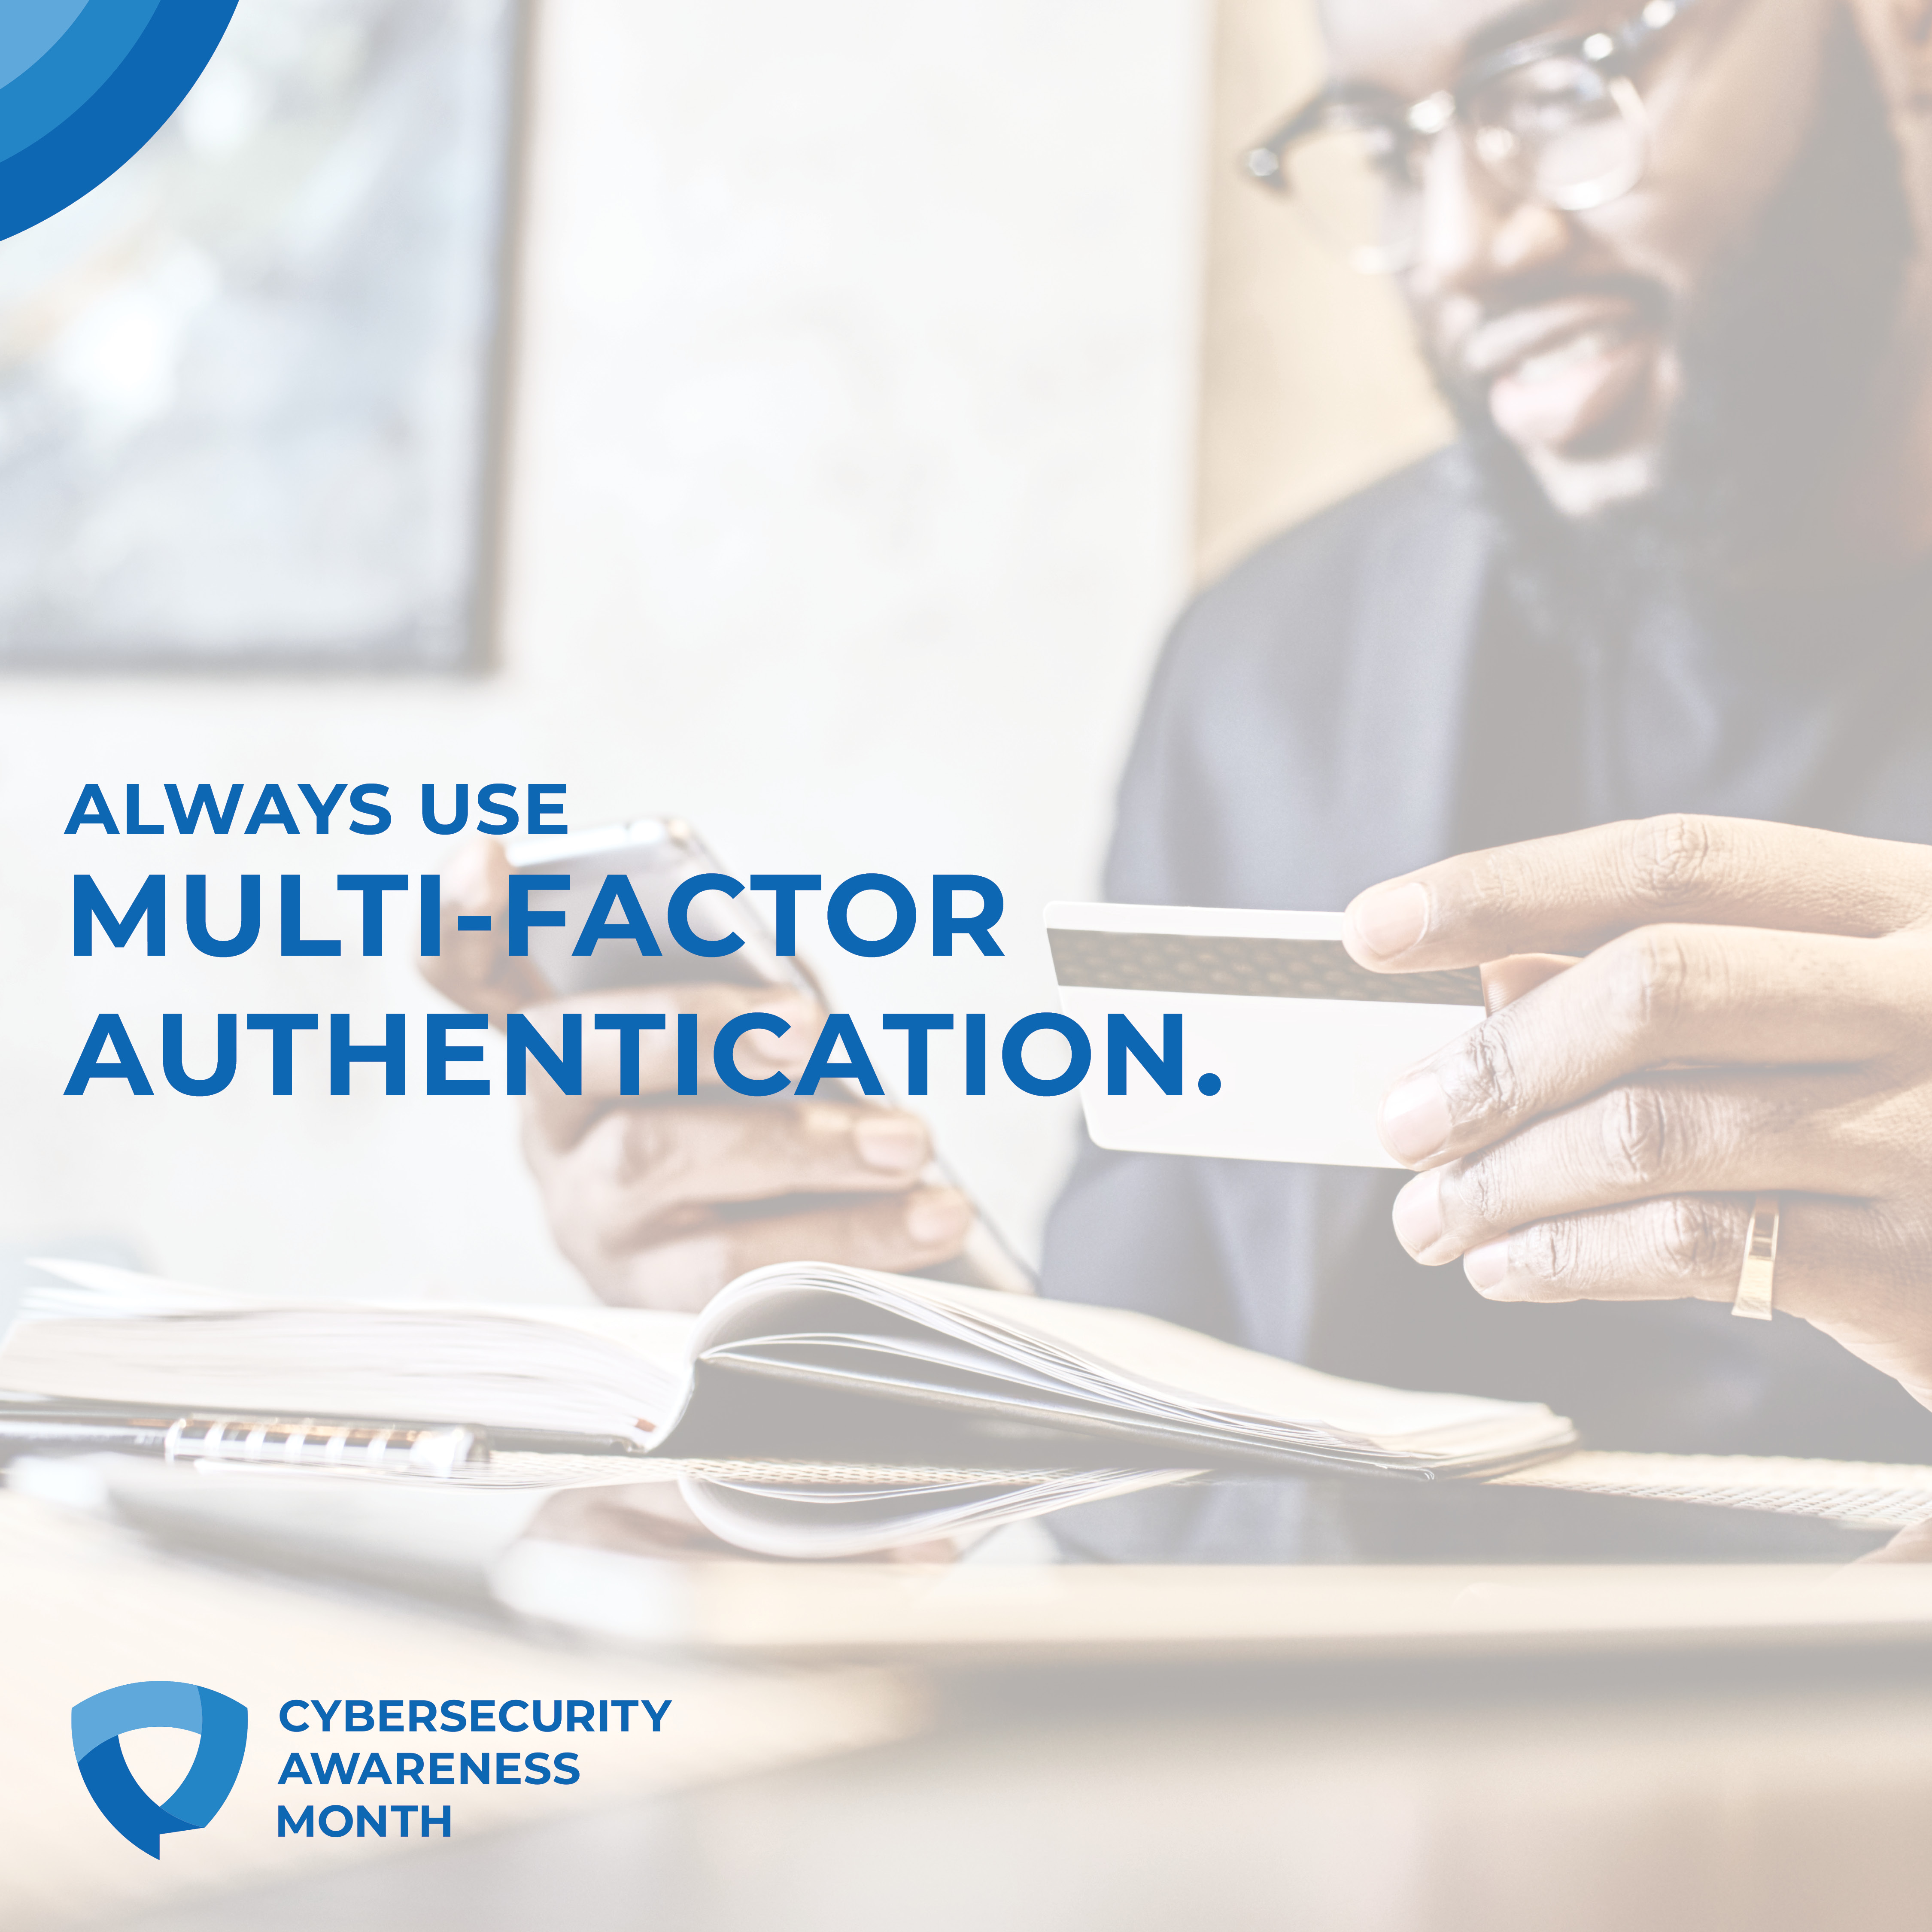 always use multi-factor authentication - cybersecurity awareness month